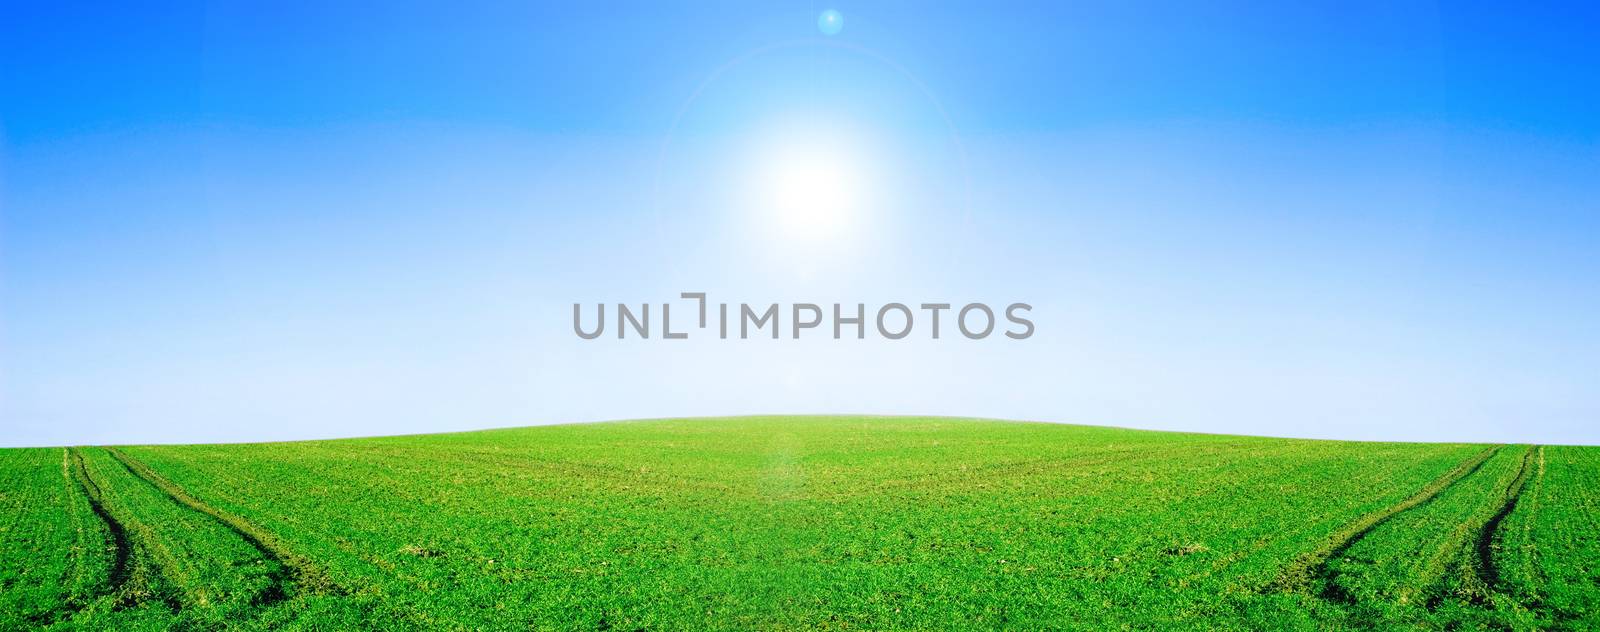 Green field and blue sky conceptual image. by satariel